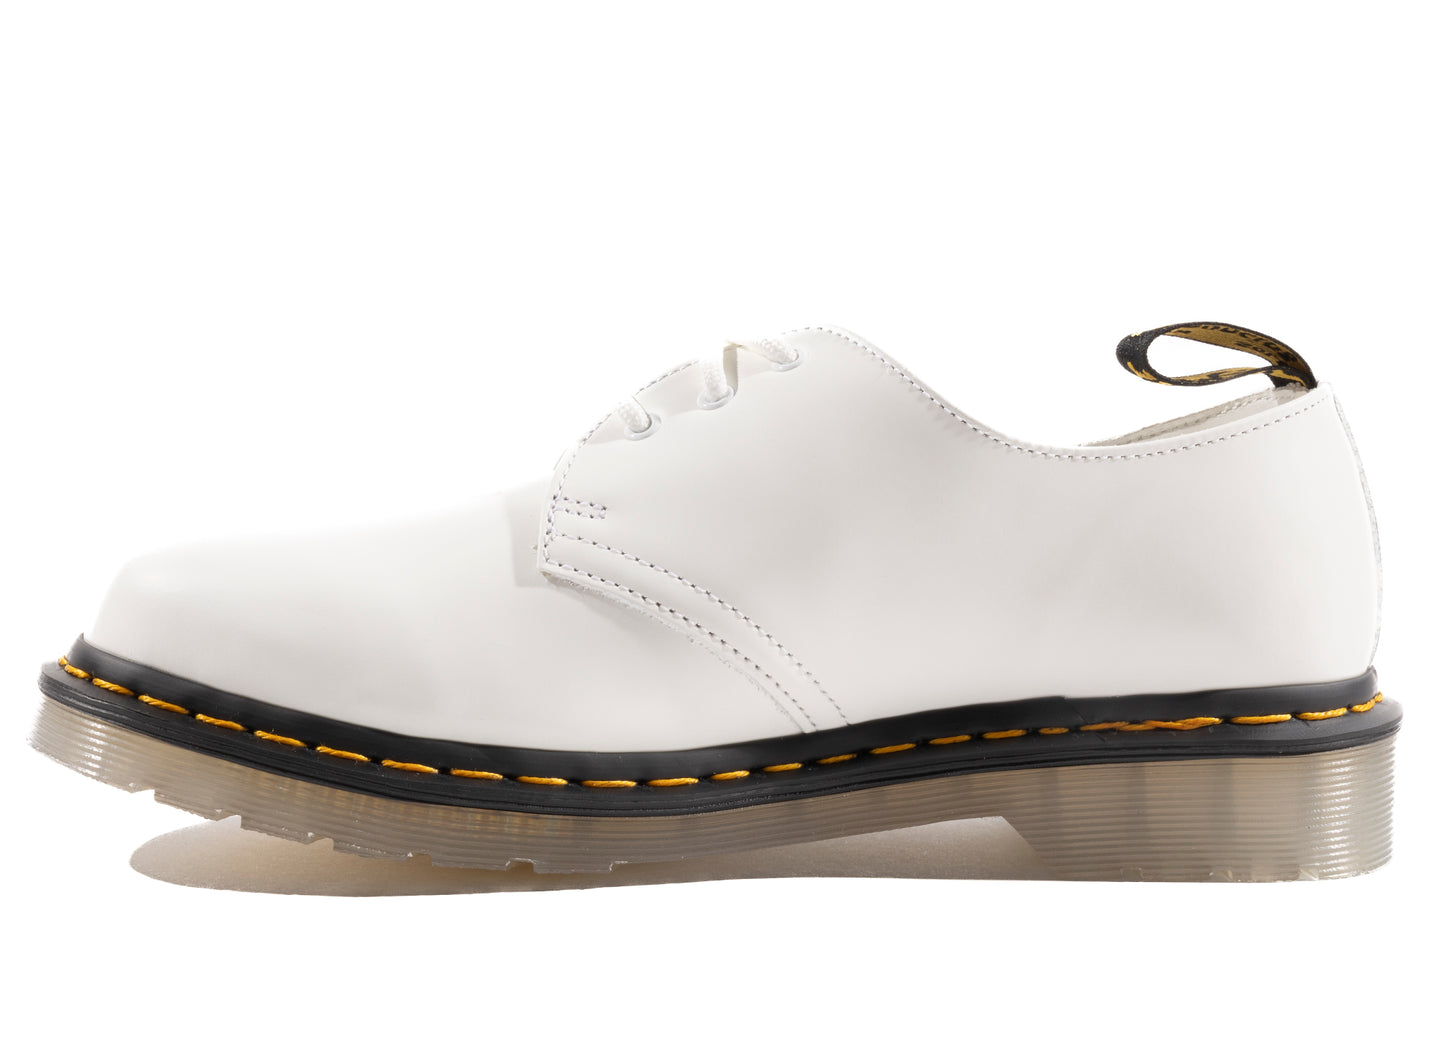 Dr. Martens Iced White Smooth 1461 Boots